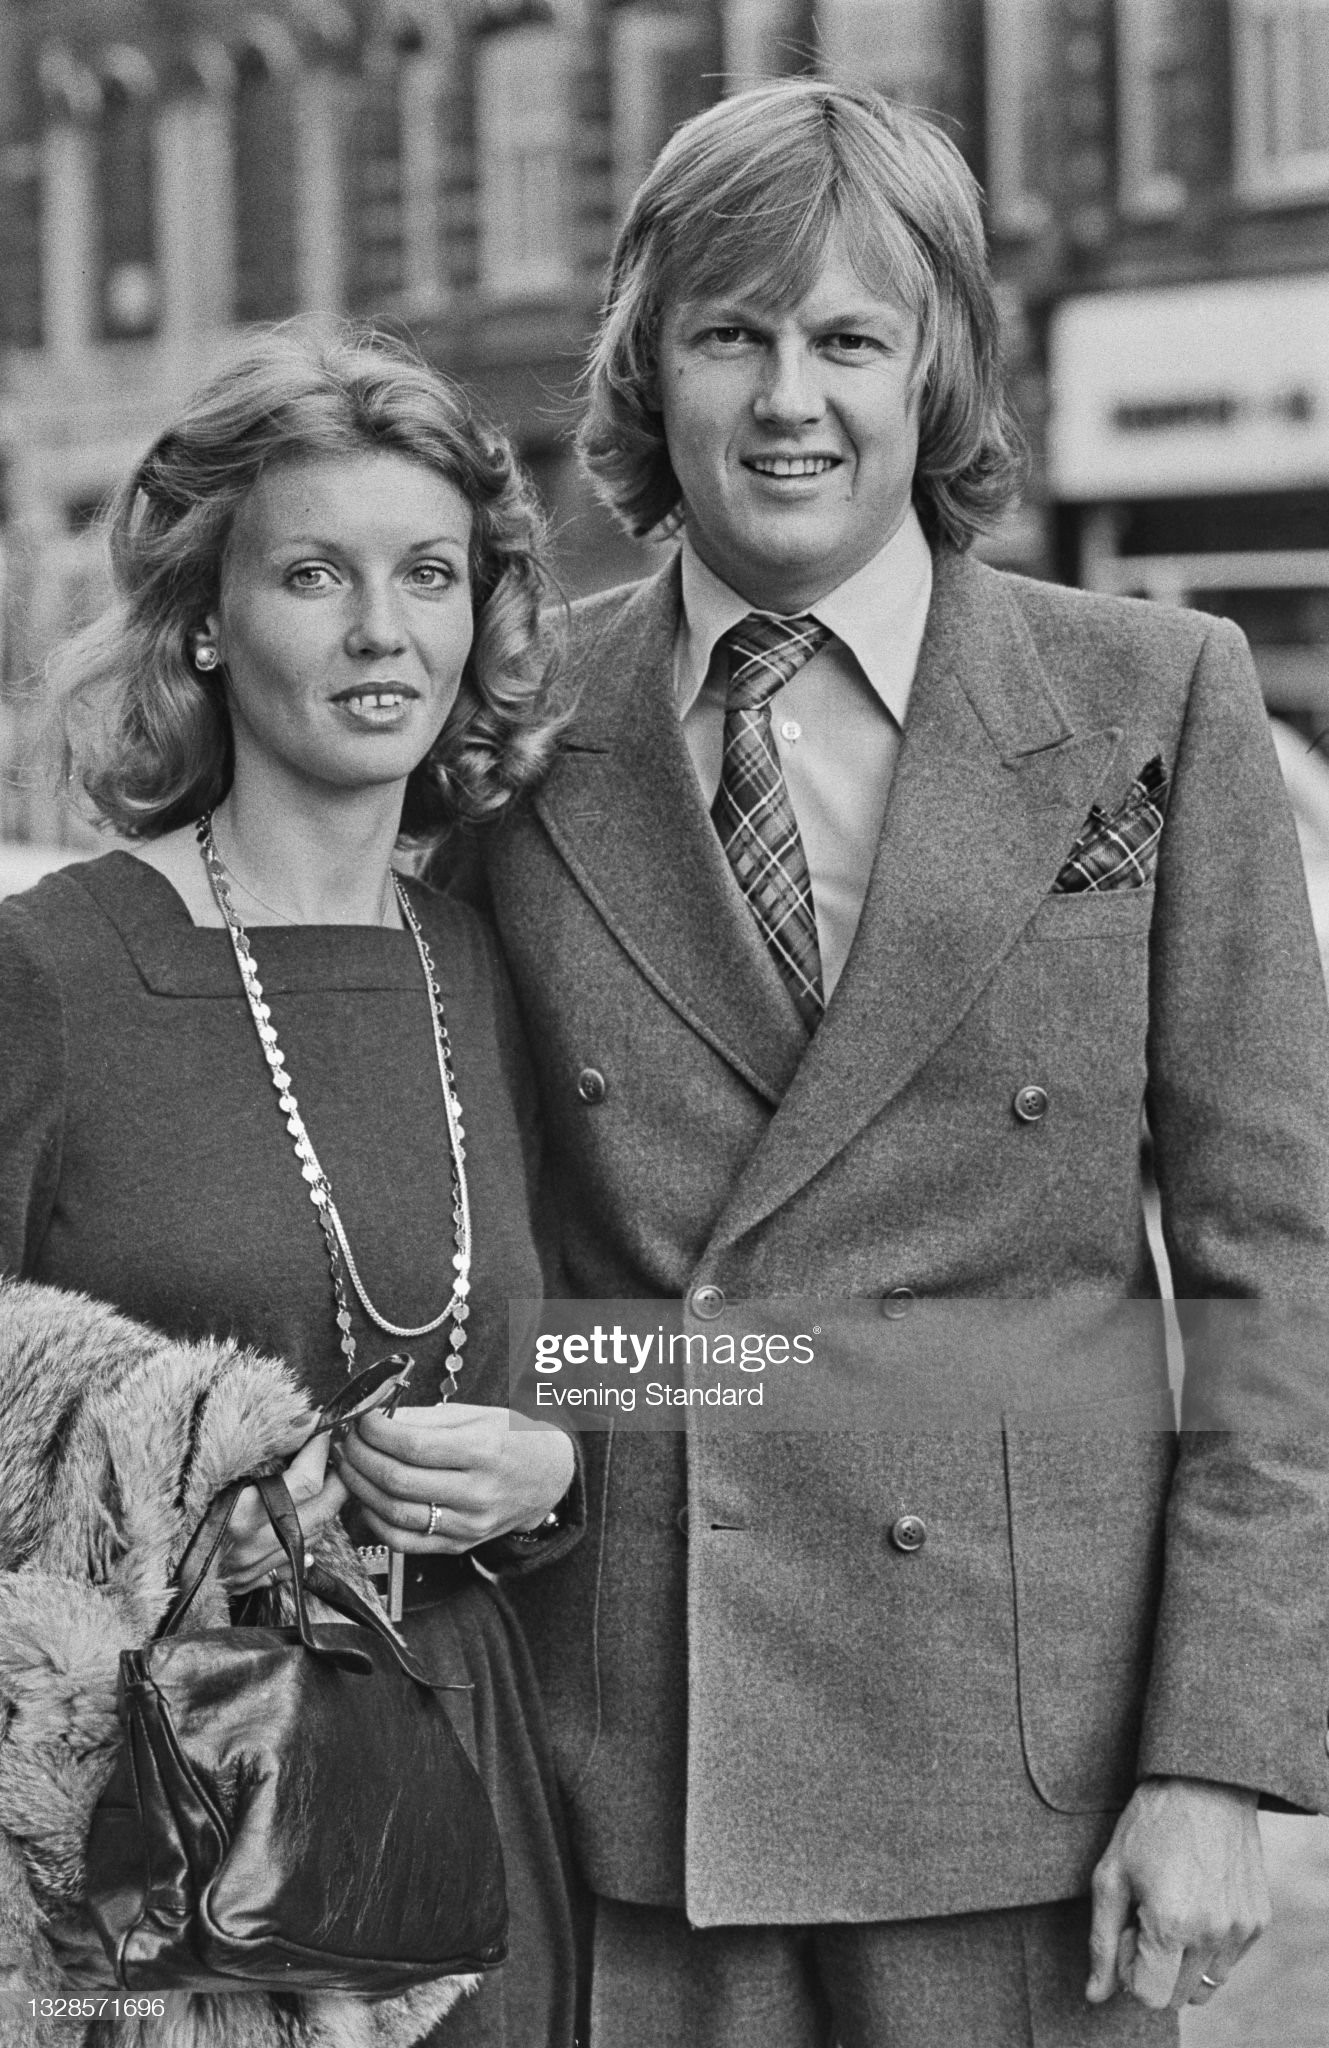 Swedish racing driver Ronnie Peterson and his girlfriend Barbro attend the wedding of British racing driver James Hunt and model Suzy Miller at Brompton Oratory in London, UK, 18th October 1974. 